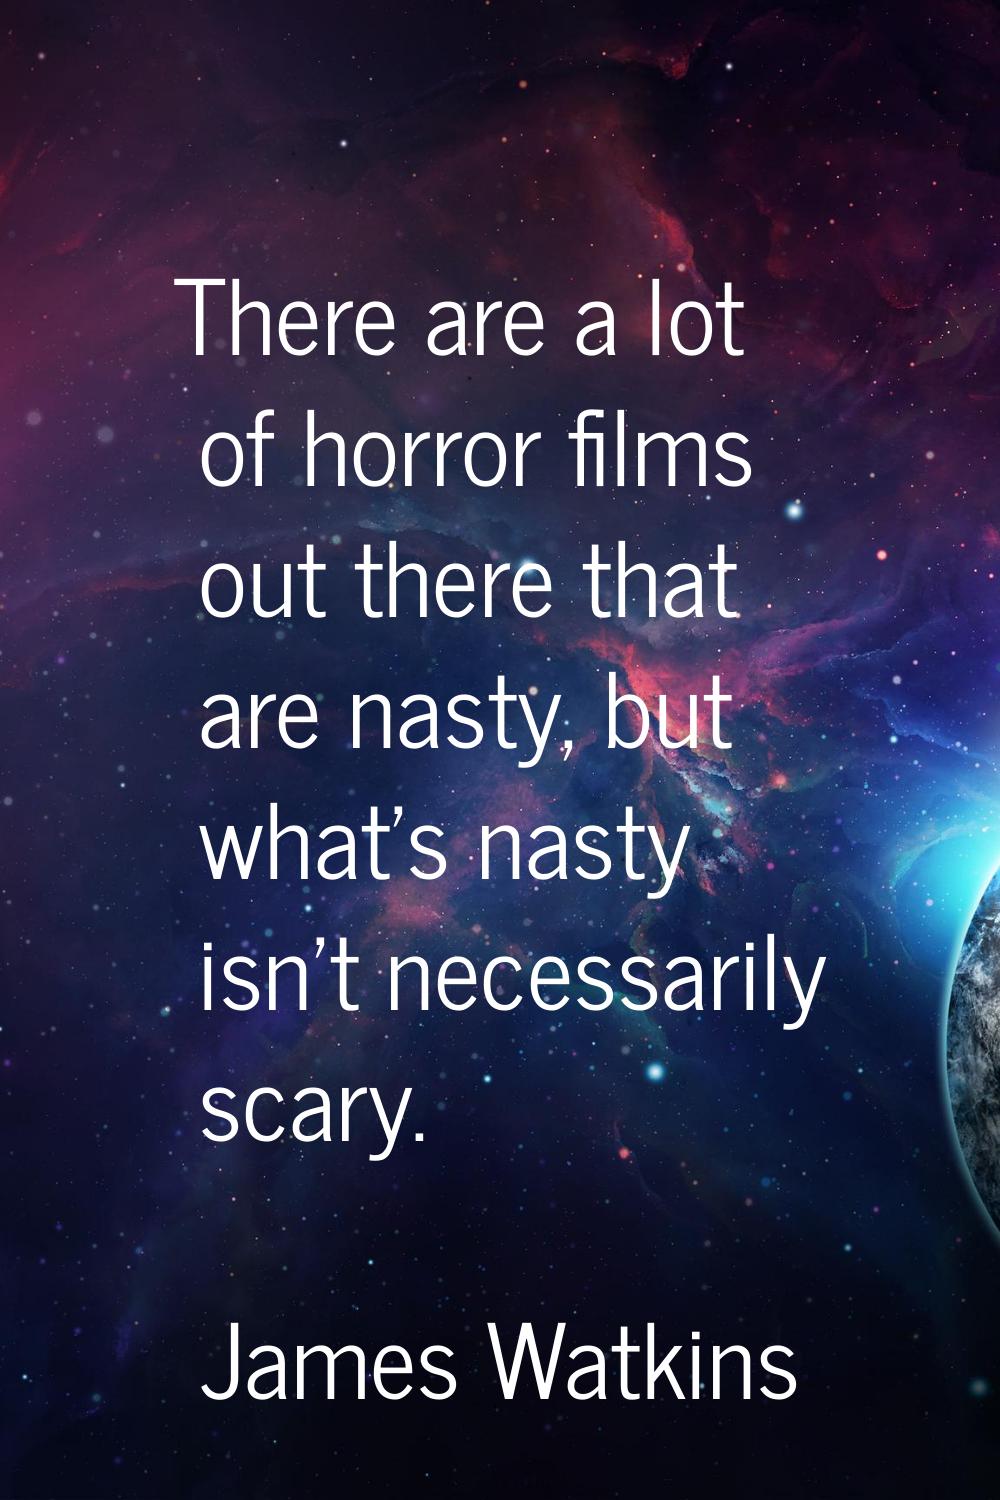 There are a lot of horror films out there that are nasty, but what's nasty isn't necessarily scary.